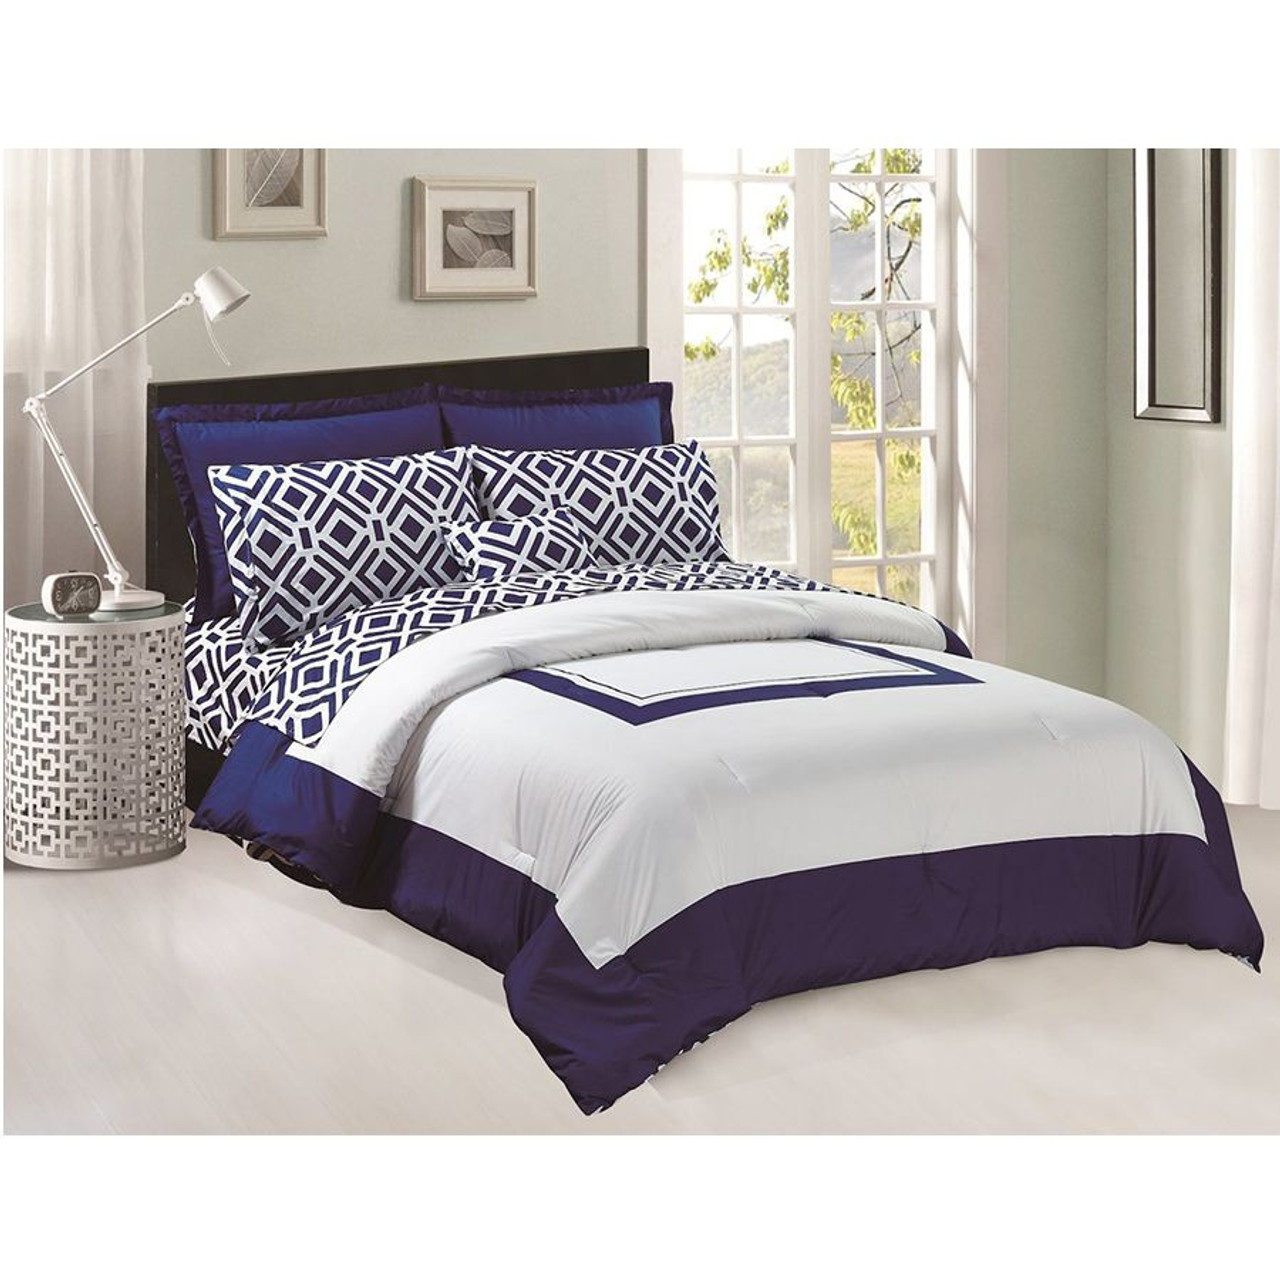 Comforter Flat Fitted Sheets Set 8 Pcs Soft Microfiber Navy Blue And White King Size By Legacy Decor Legacy Decor